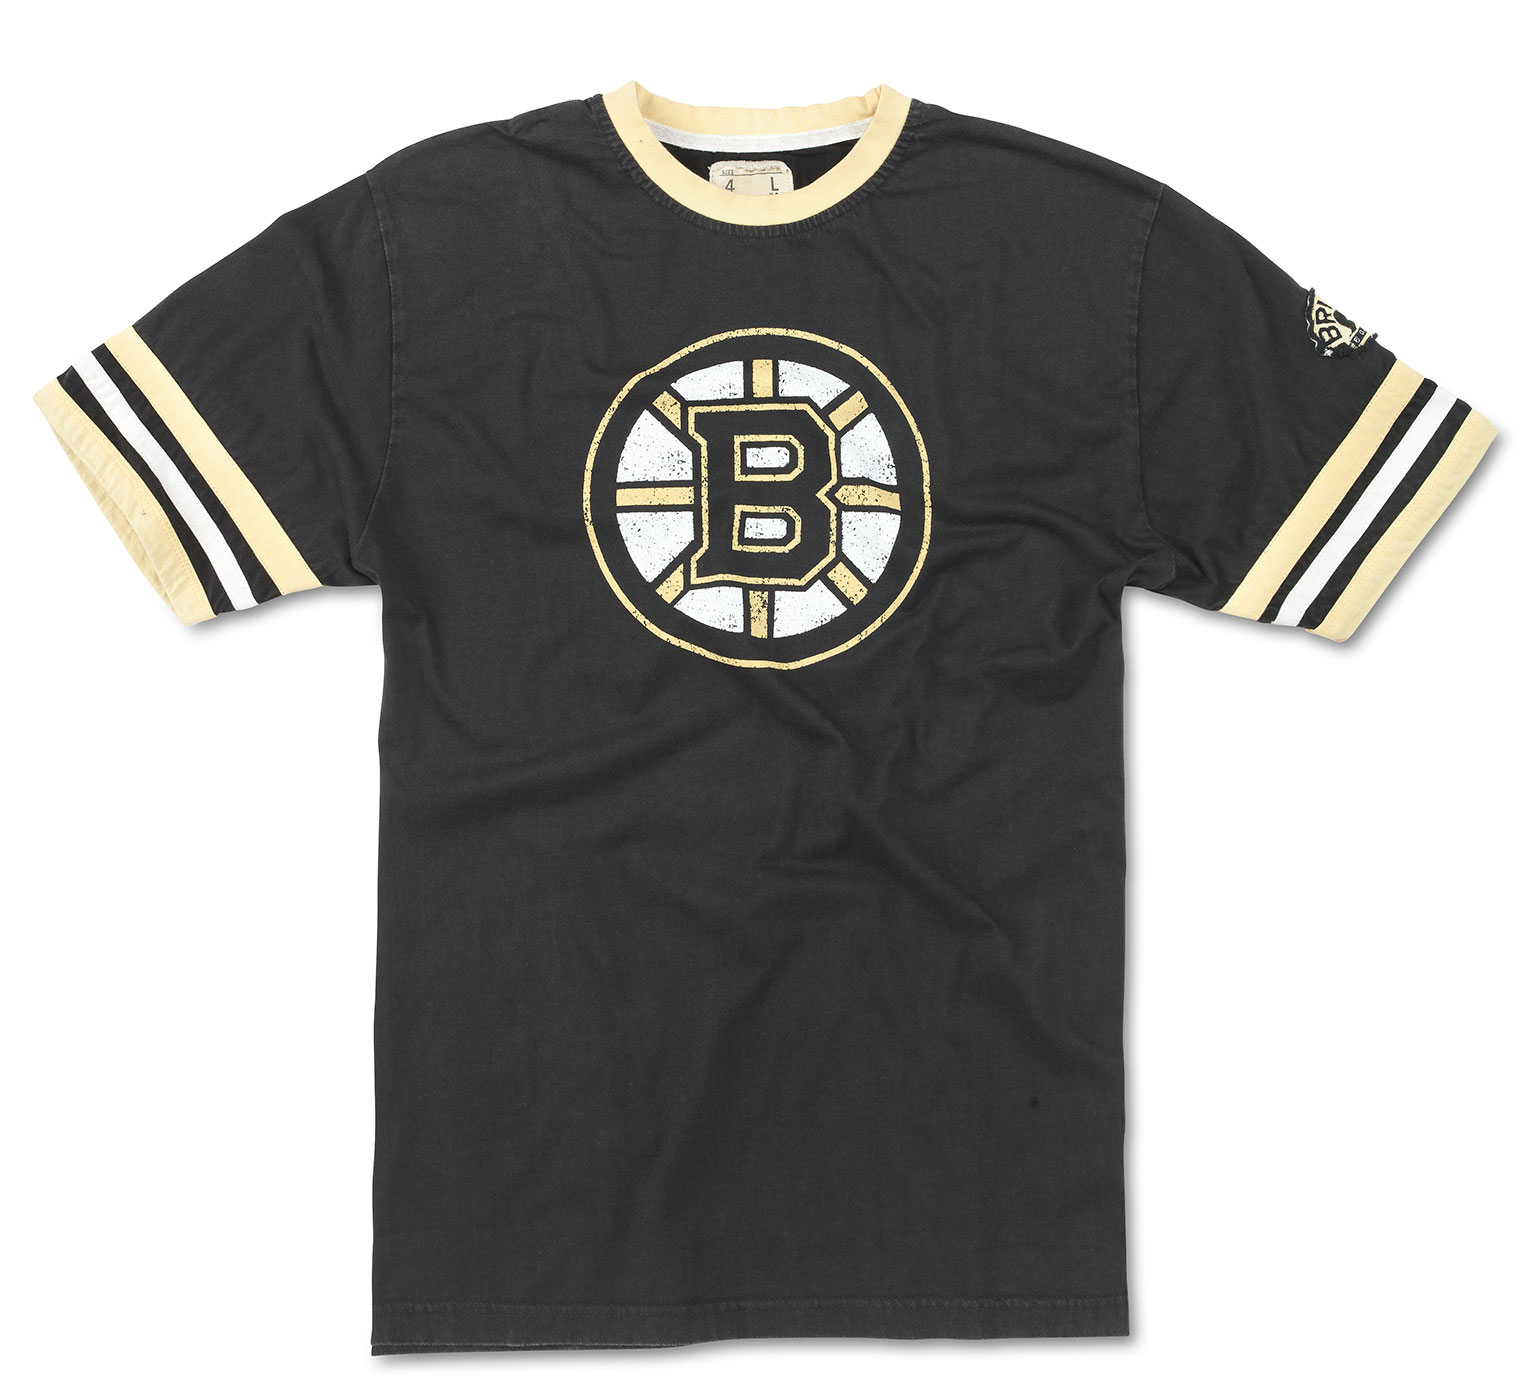 Remote Control  Boston Bruins — American Needle intended for Cuffs And Collars Boston